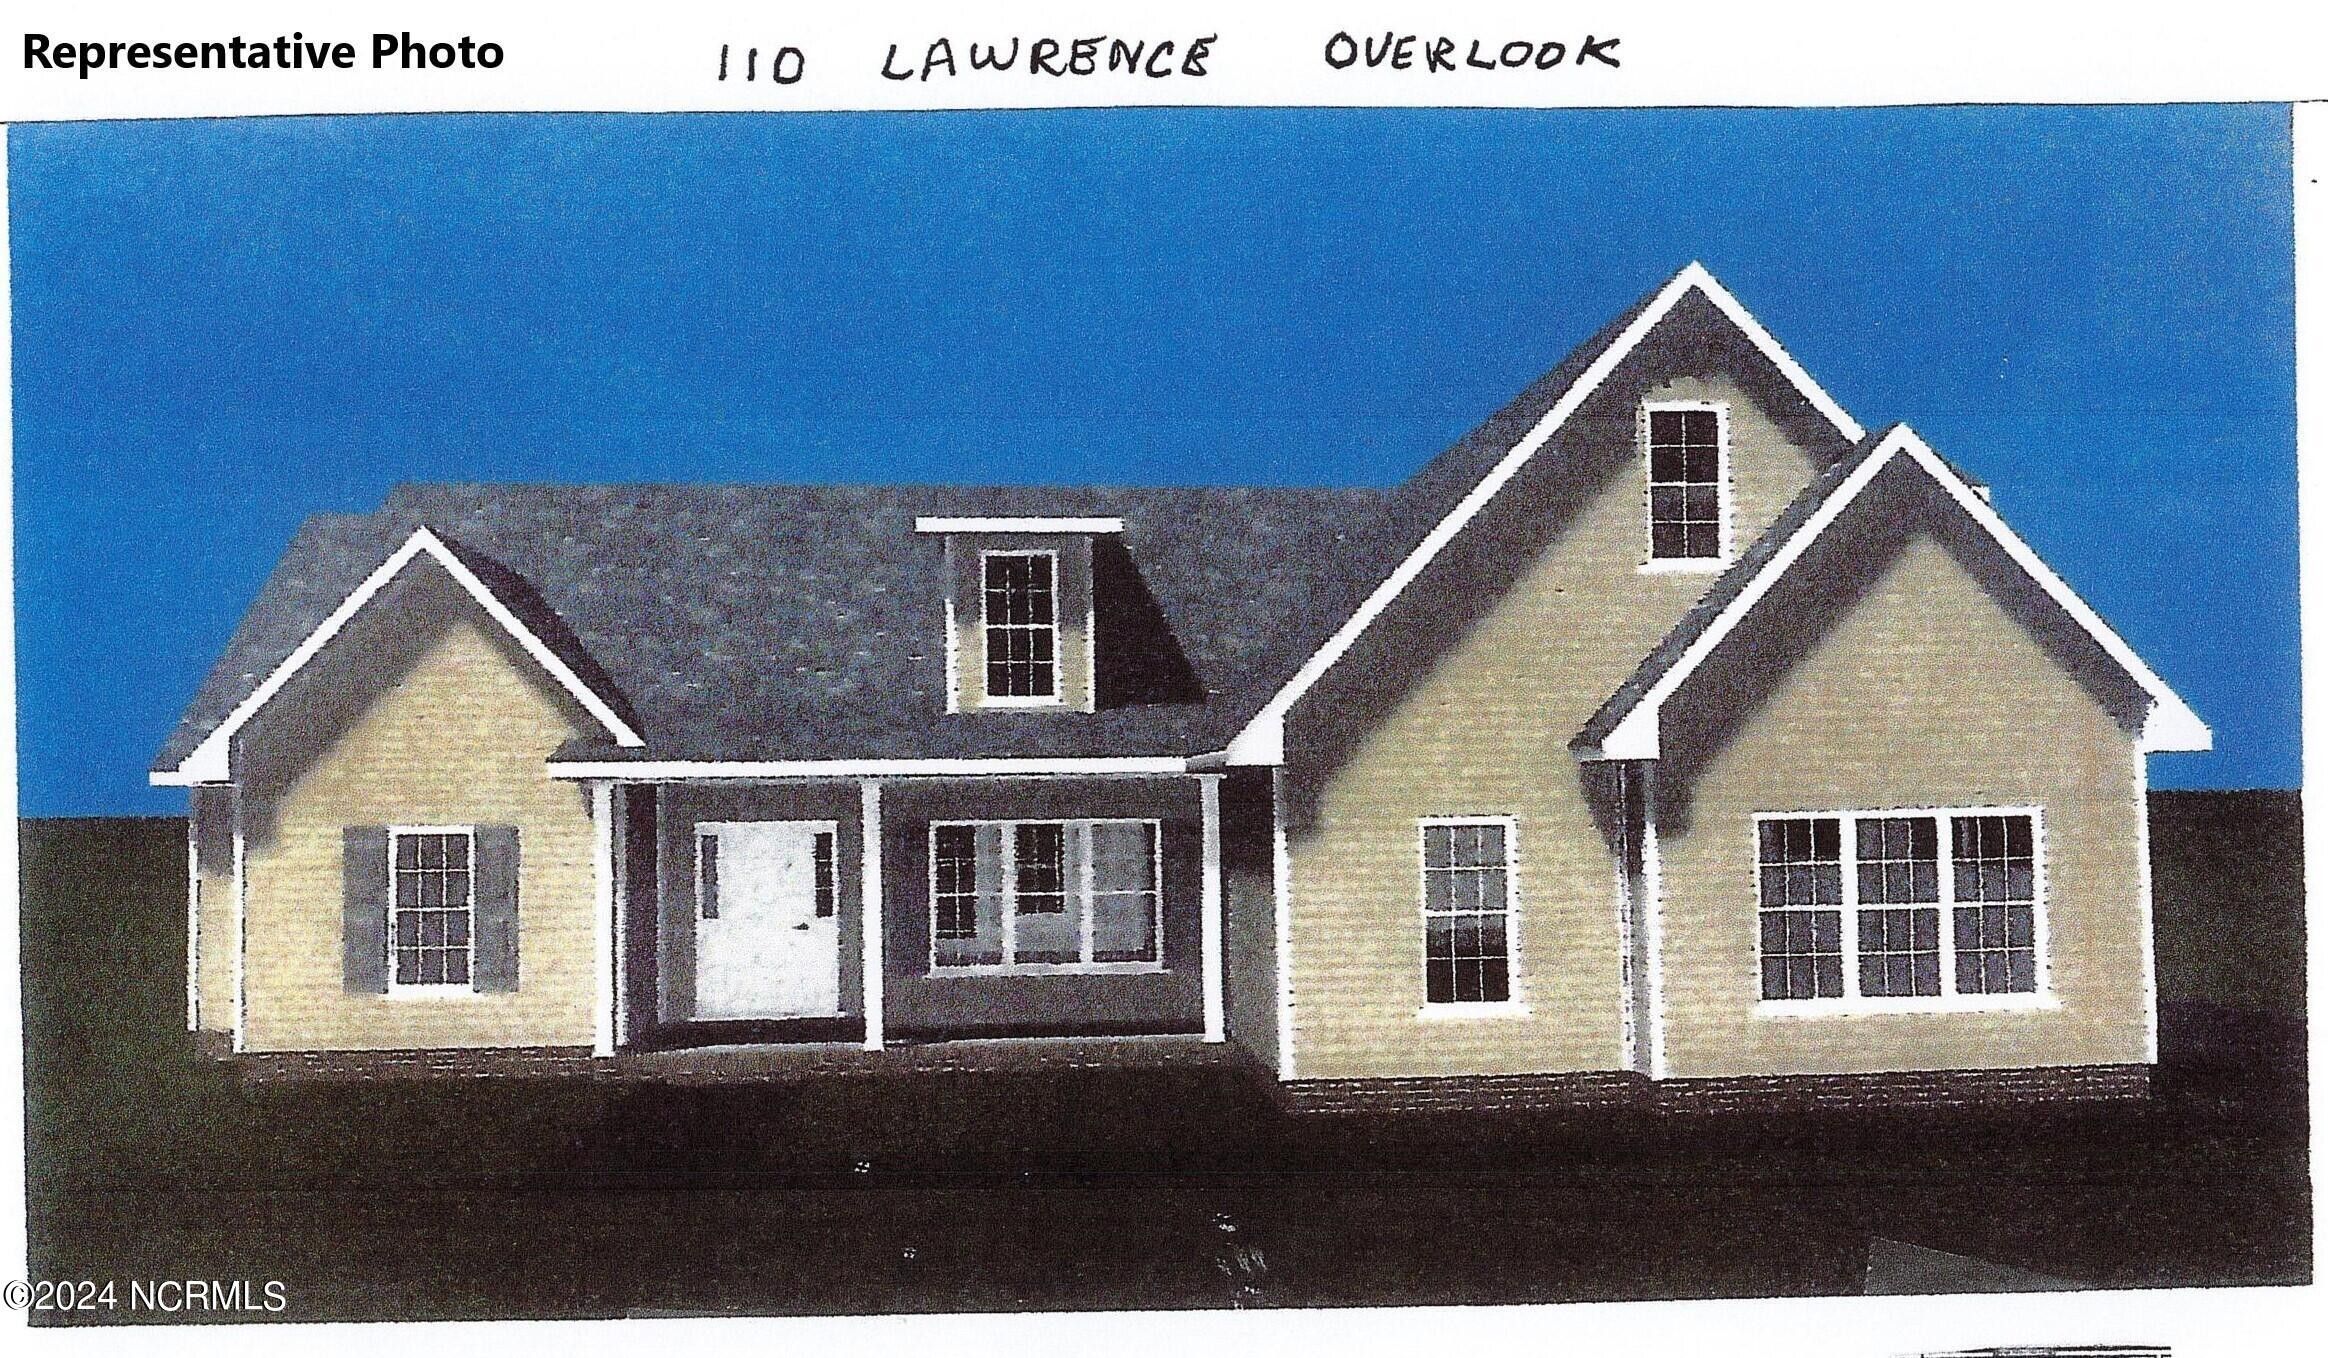 110 Lawrence Overlook. West End, NC 27376